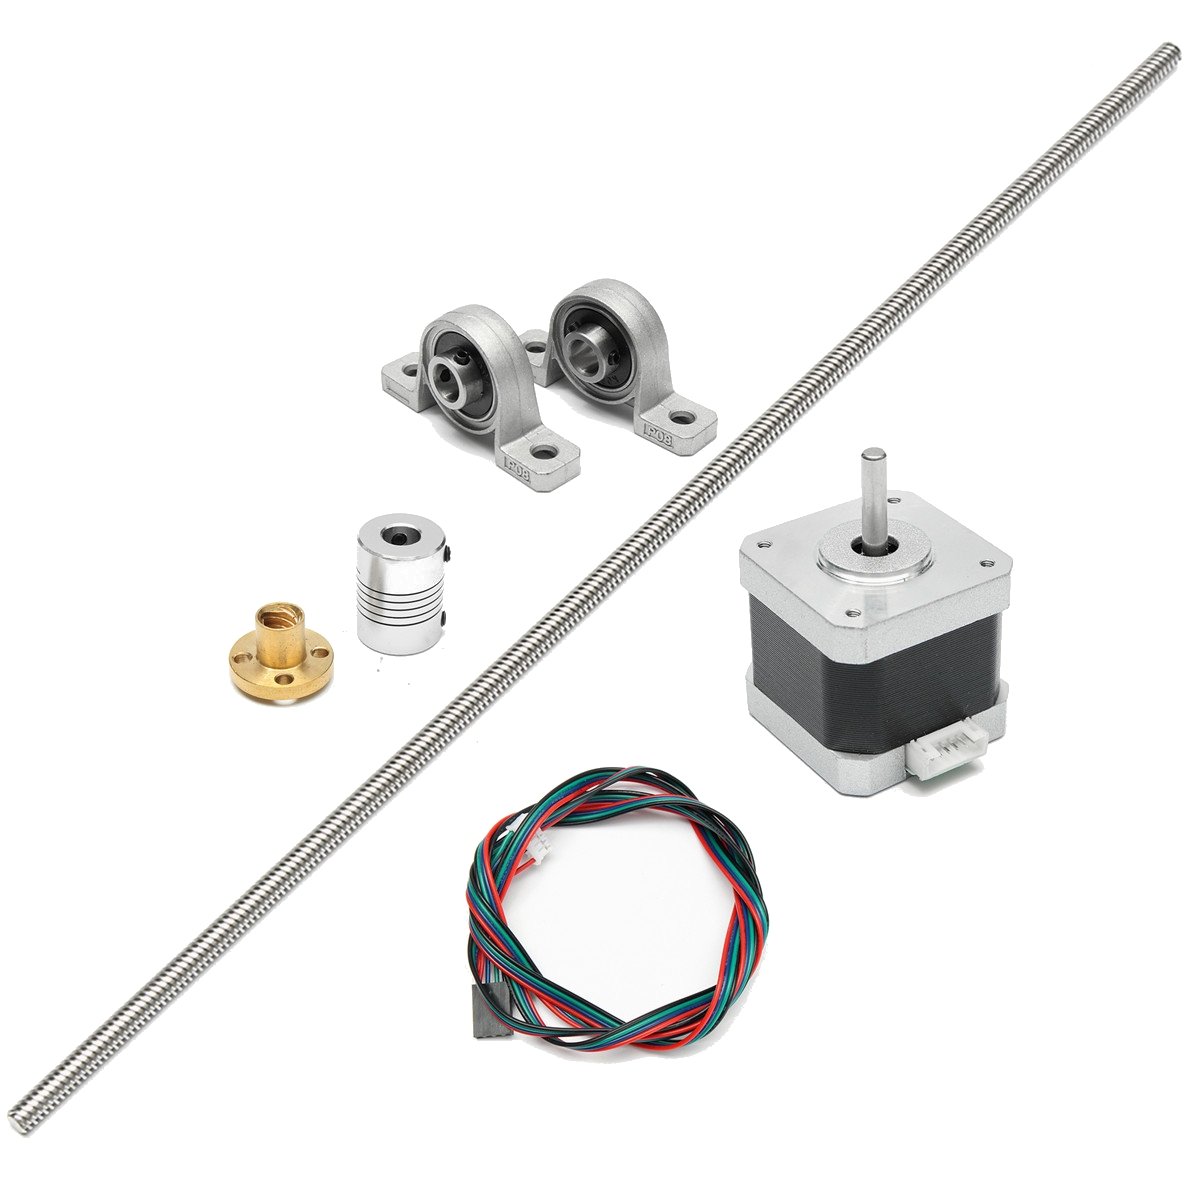 T8 600mm Stainless Steel Lead Screw Coupling Shaft Mounting + Motor For 3D Printer 2